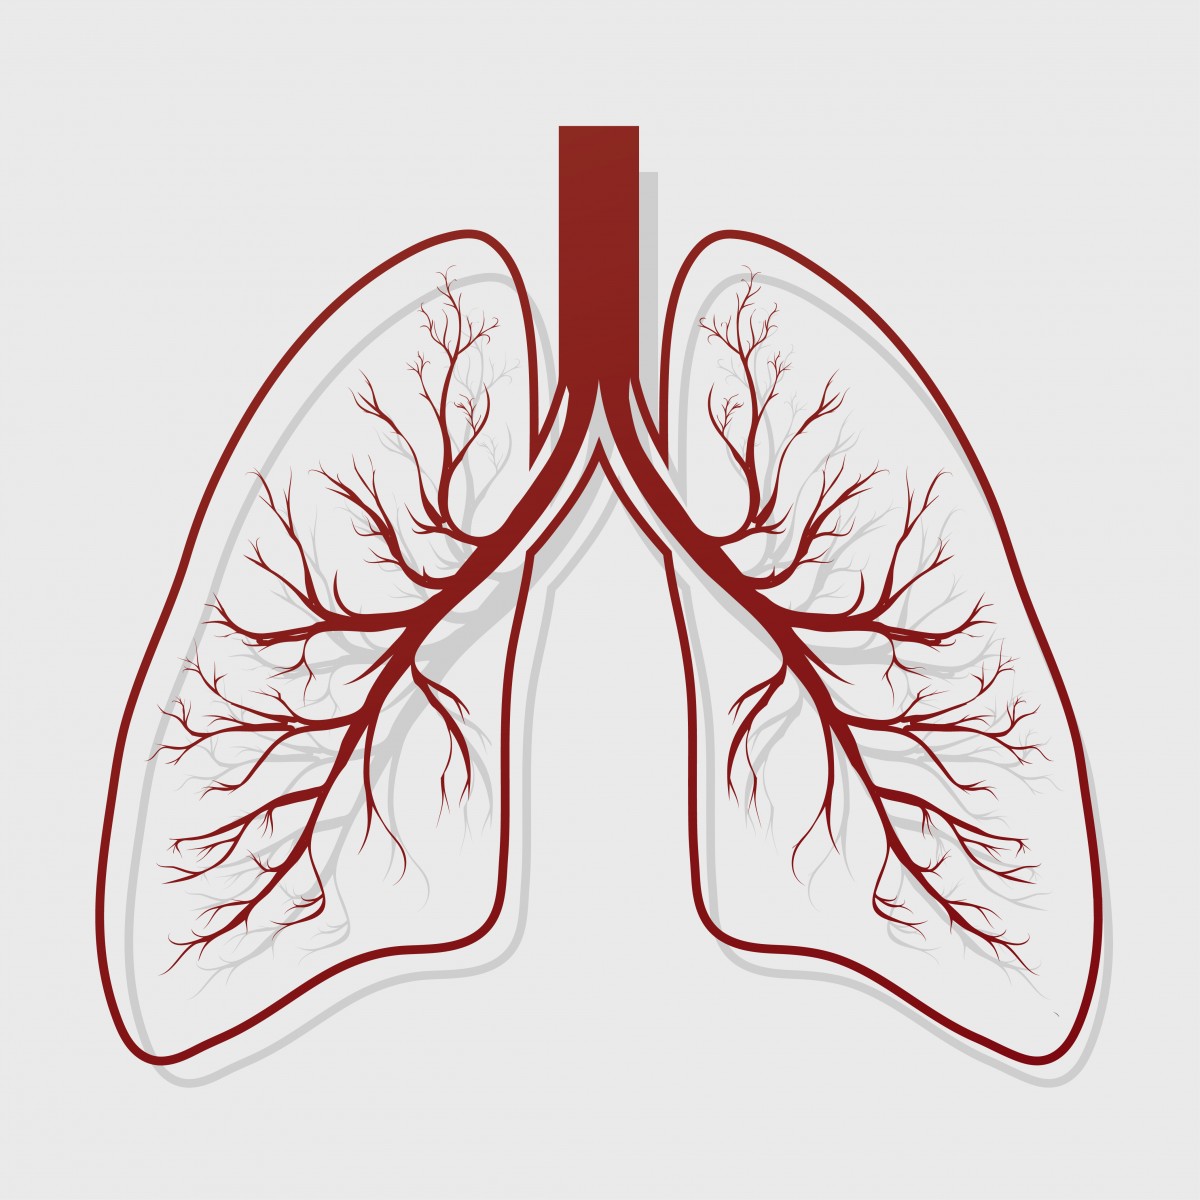 Keratan sulfate and COPD